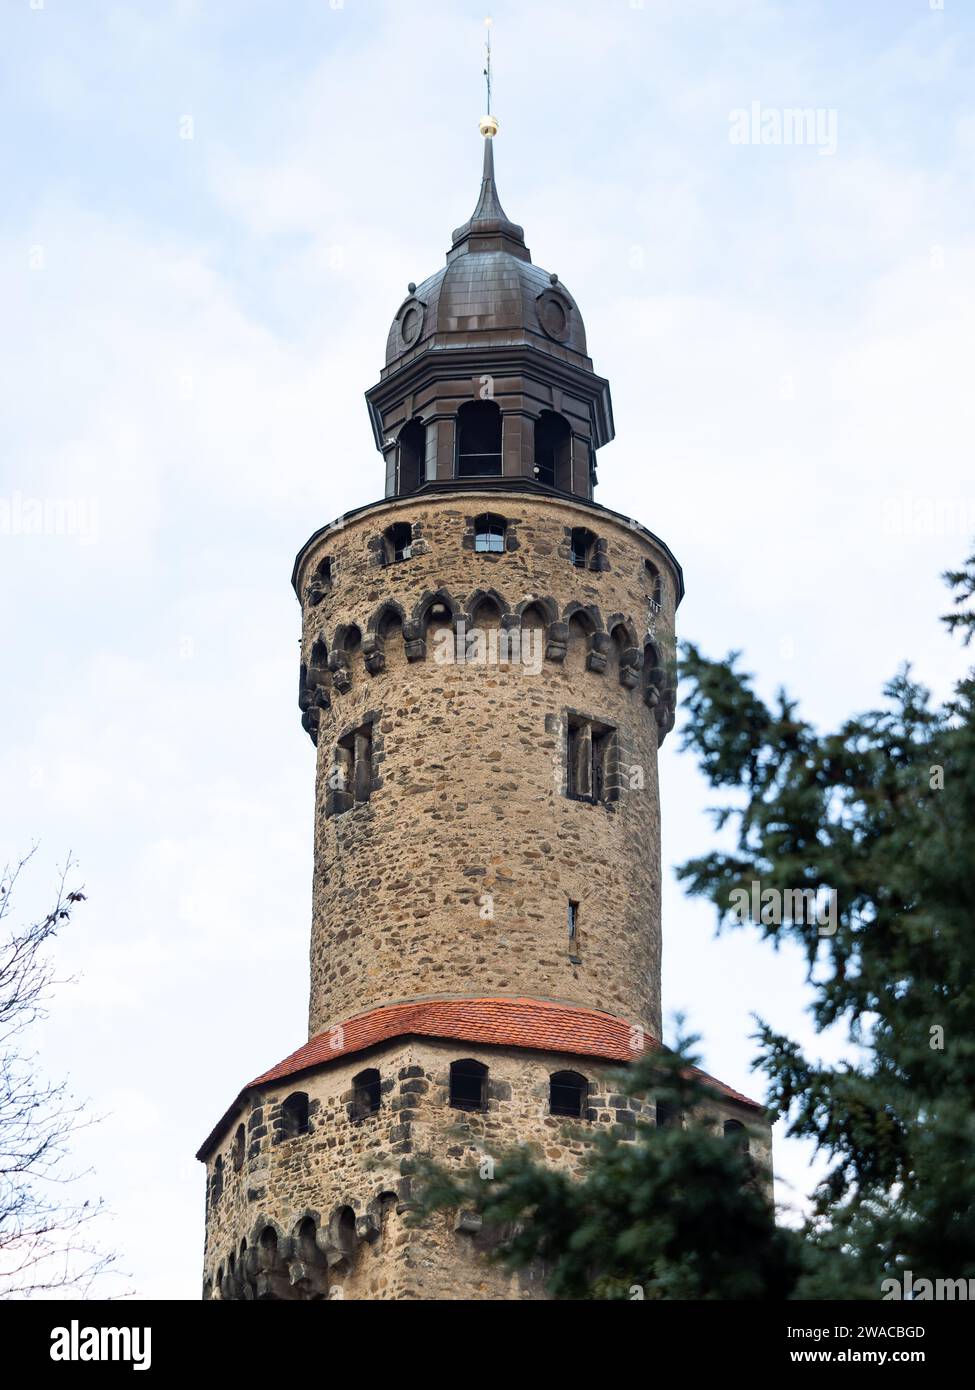 Reichenbach Tower building in Görlitz, Germany. The part of the historic fortification of the city is a famous medieval landmark. Stock Photo